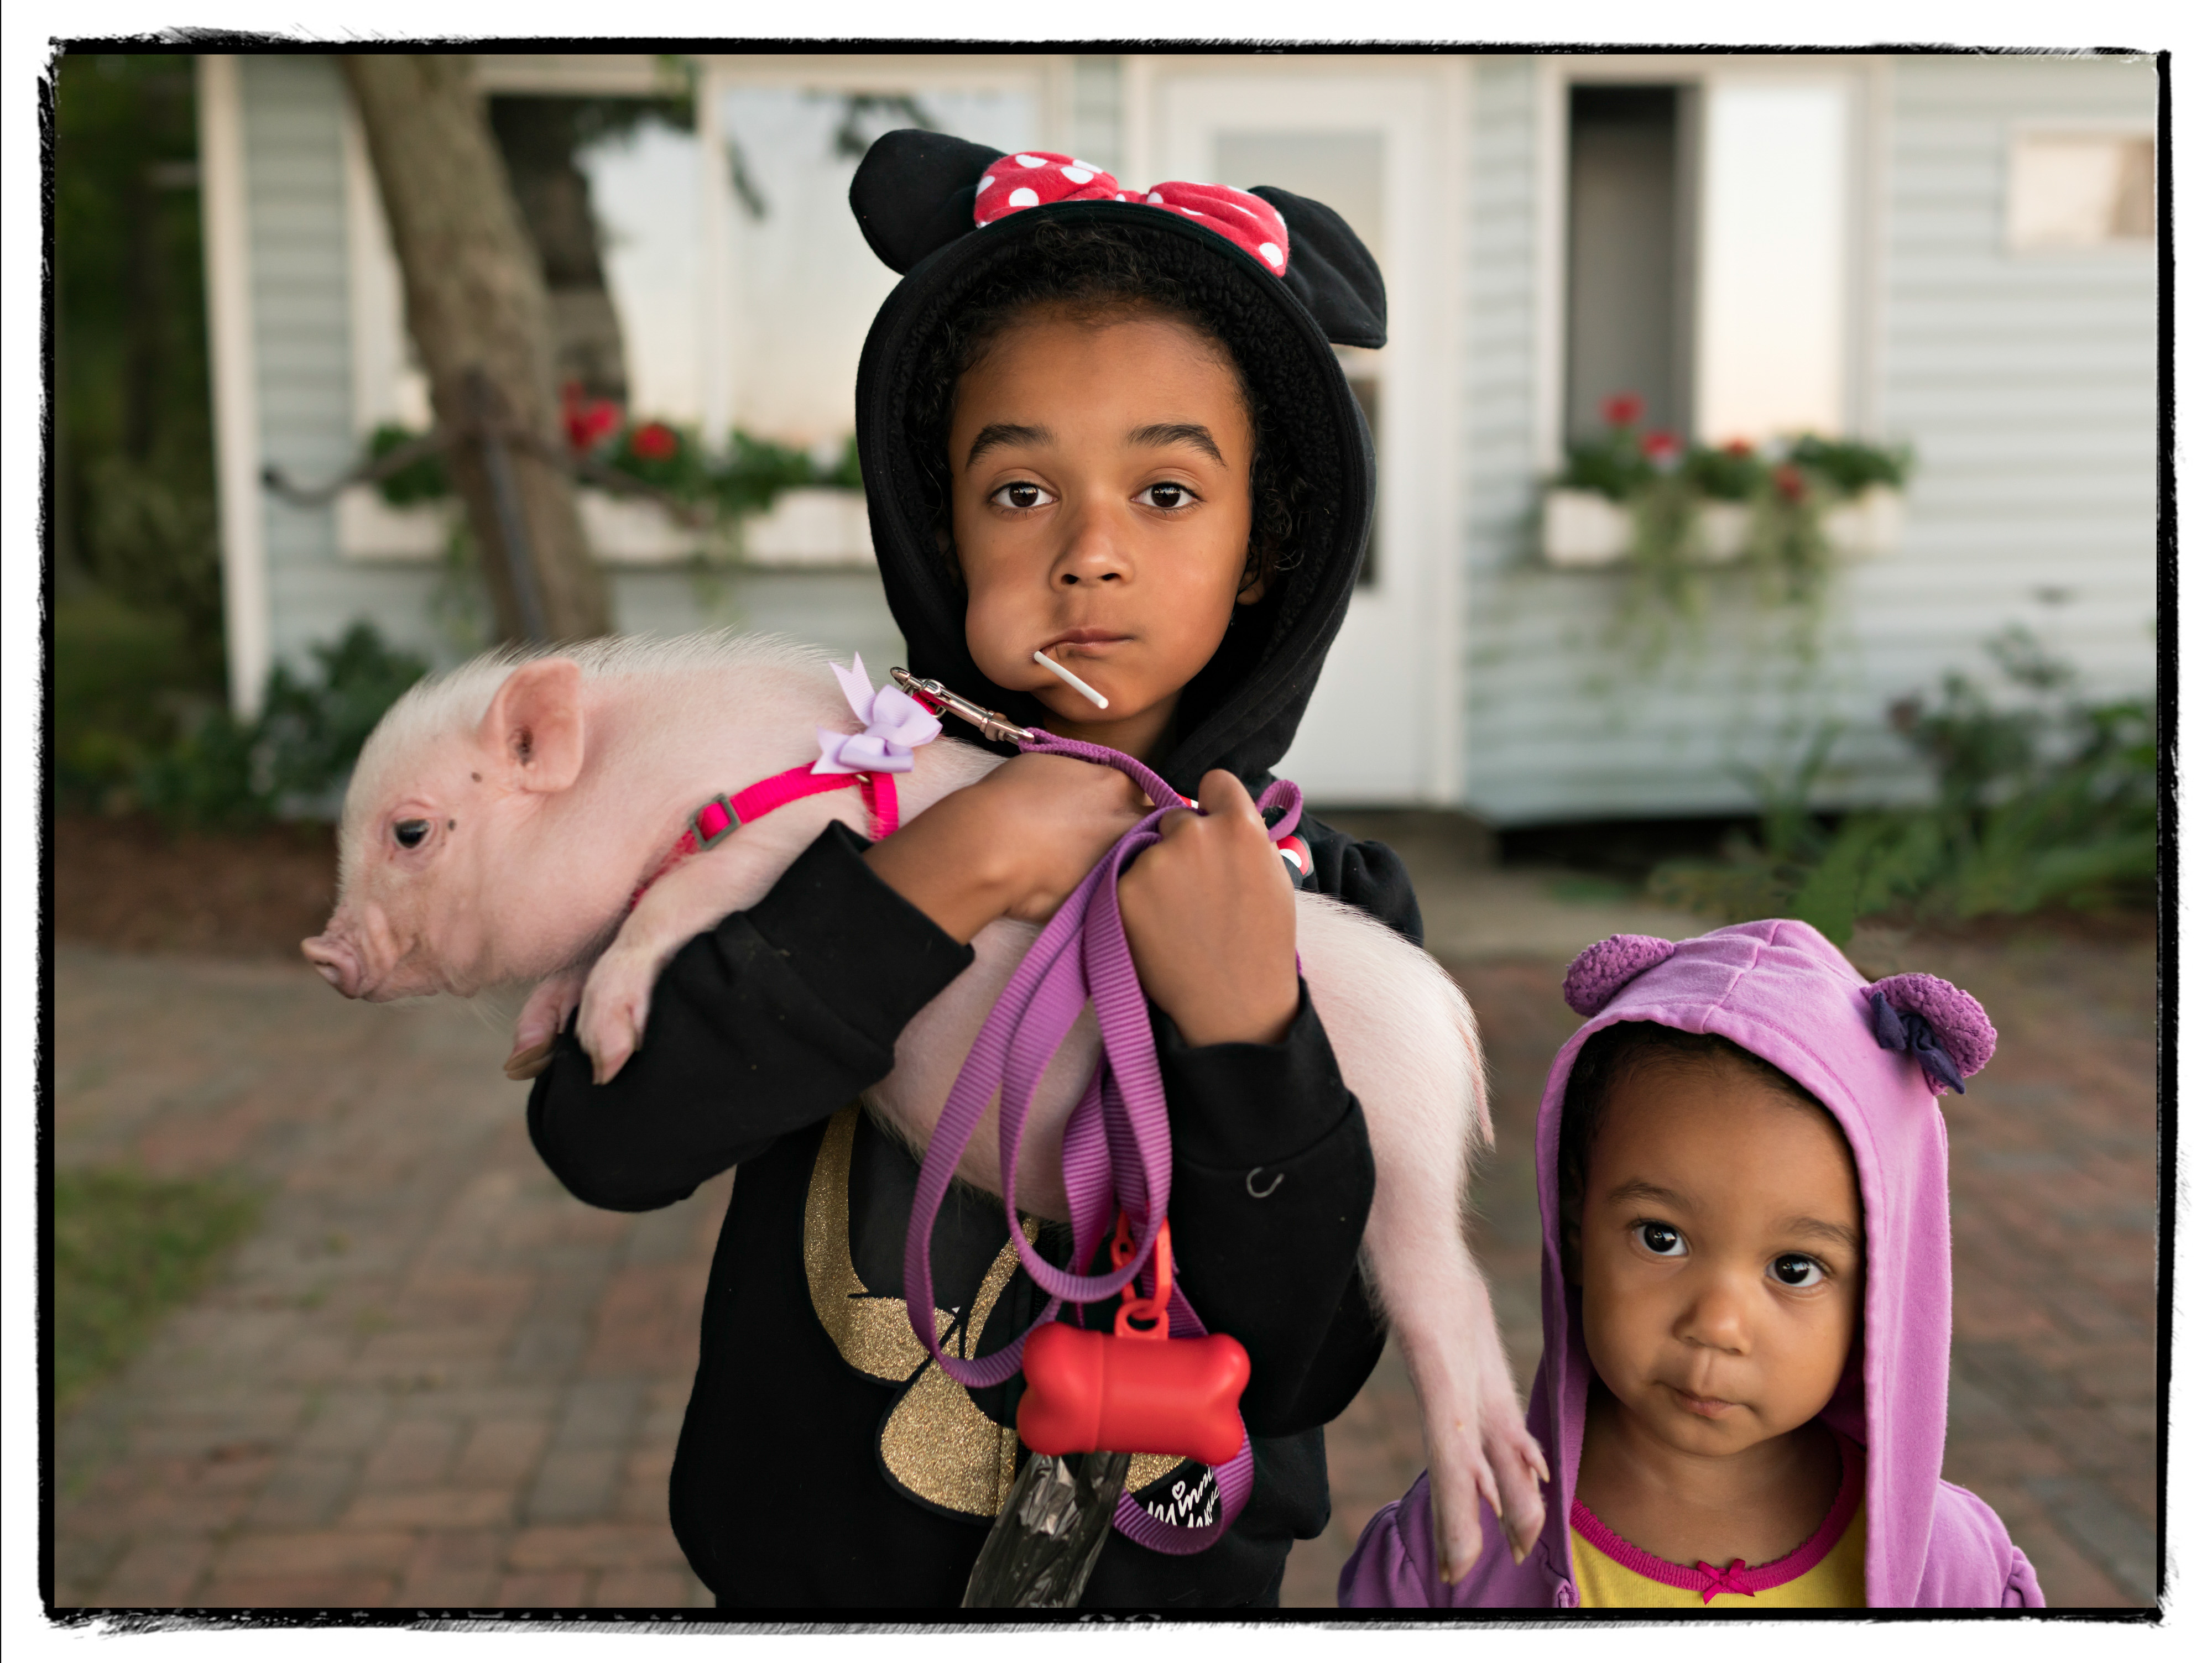 Two sisters pose for a portrait while the older sister in the middle holds their pet pig.